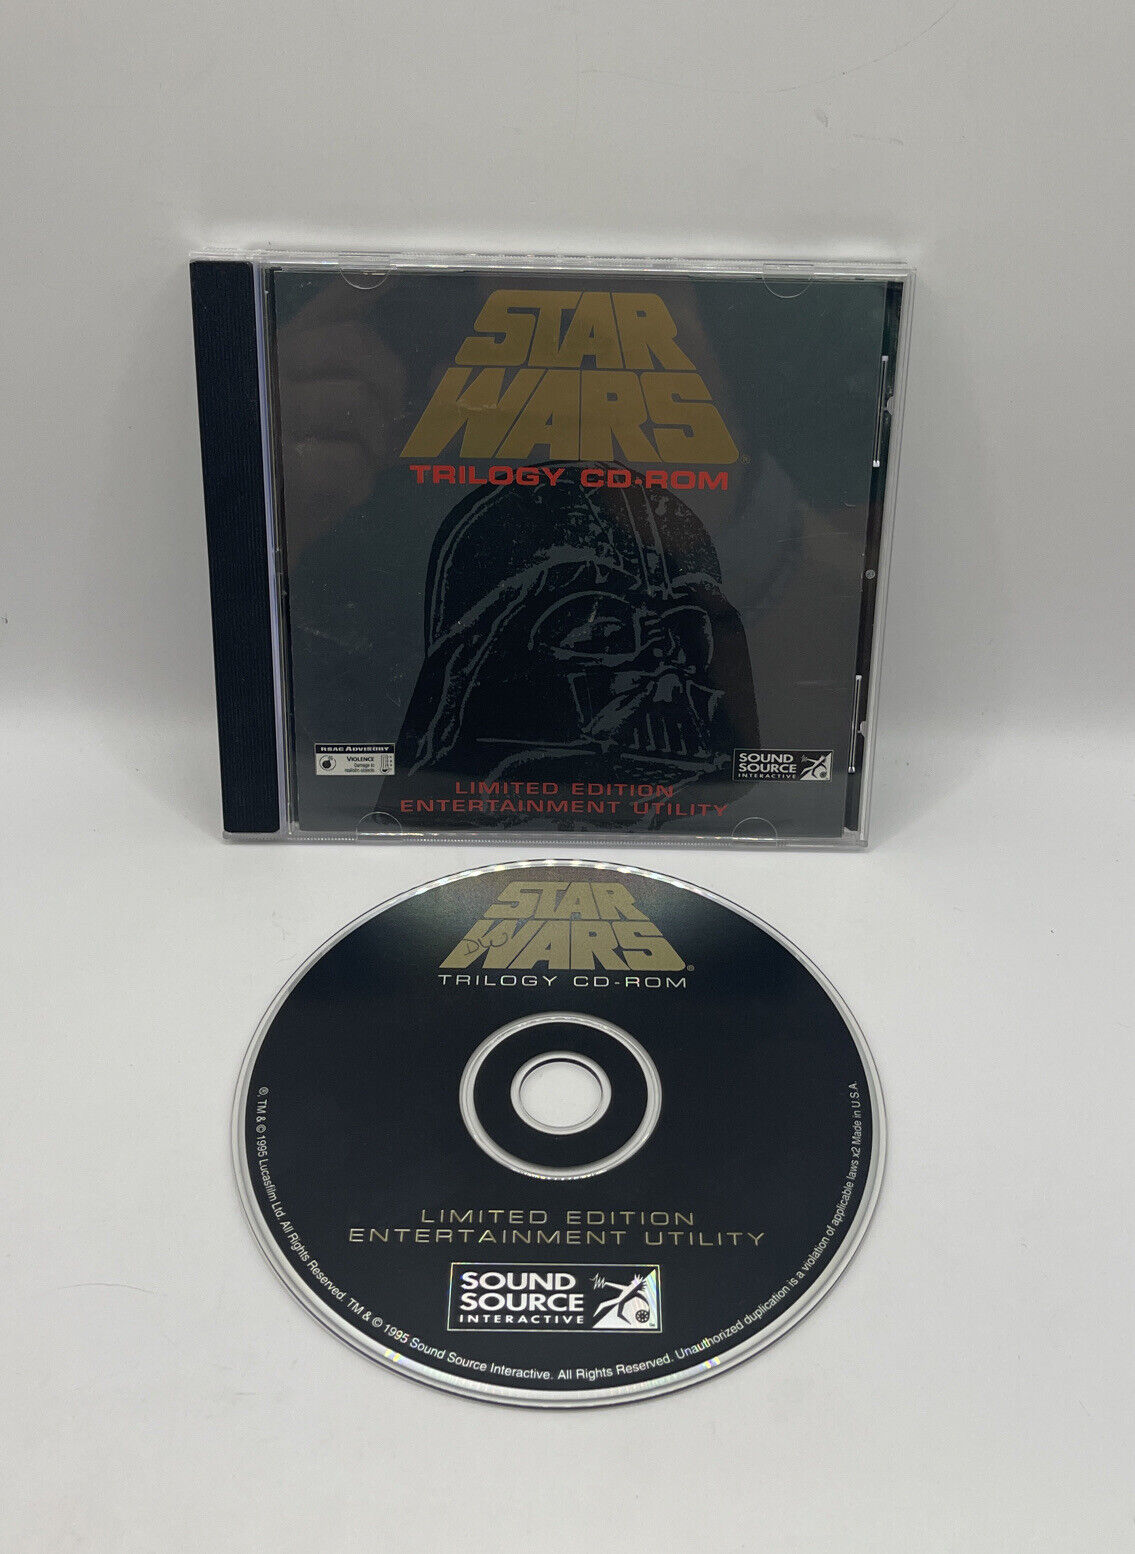 Star Wars Trilogy CD-ROM Limited Edition Entertainment Utility nice set